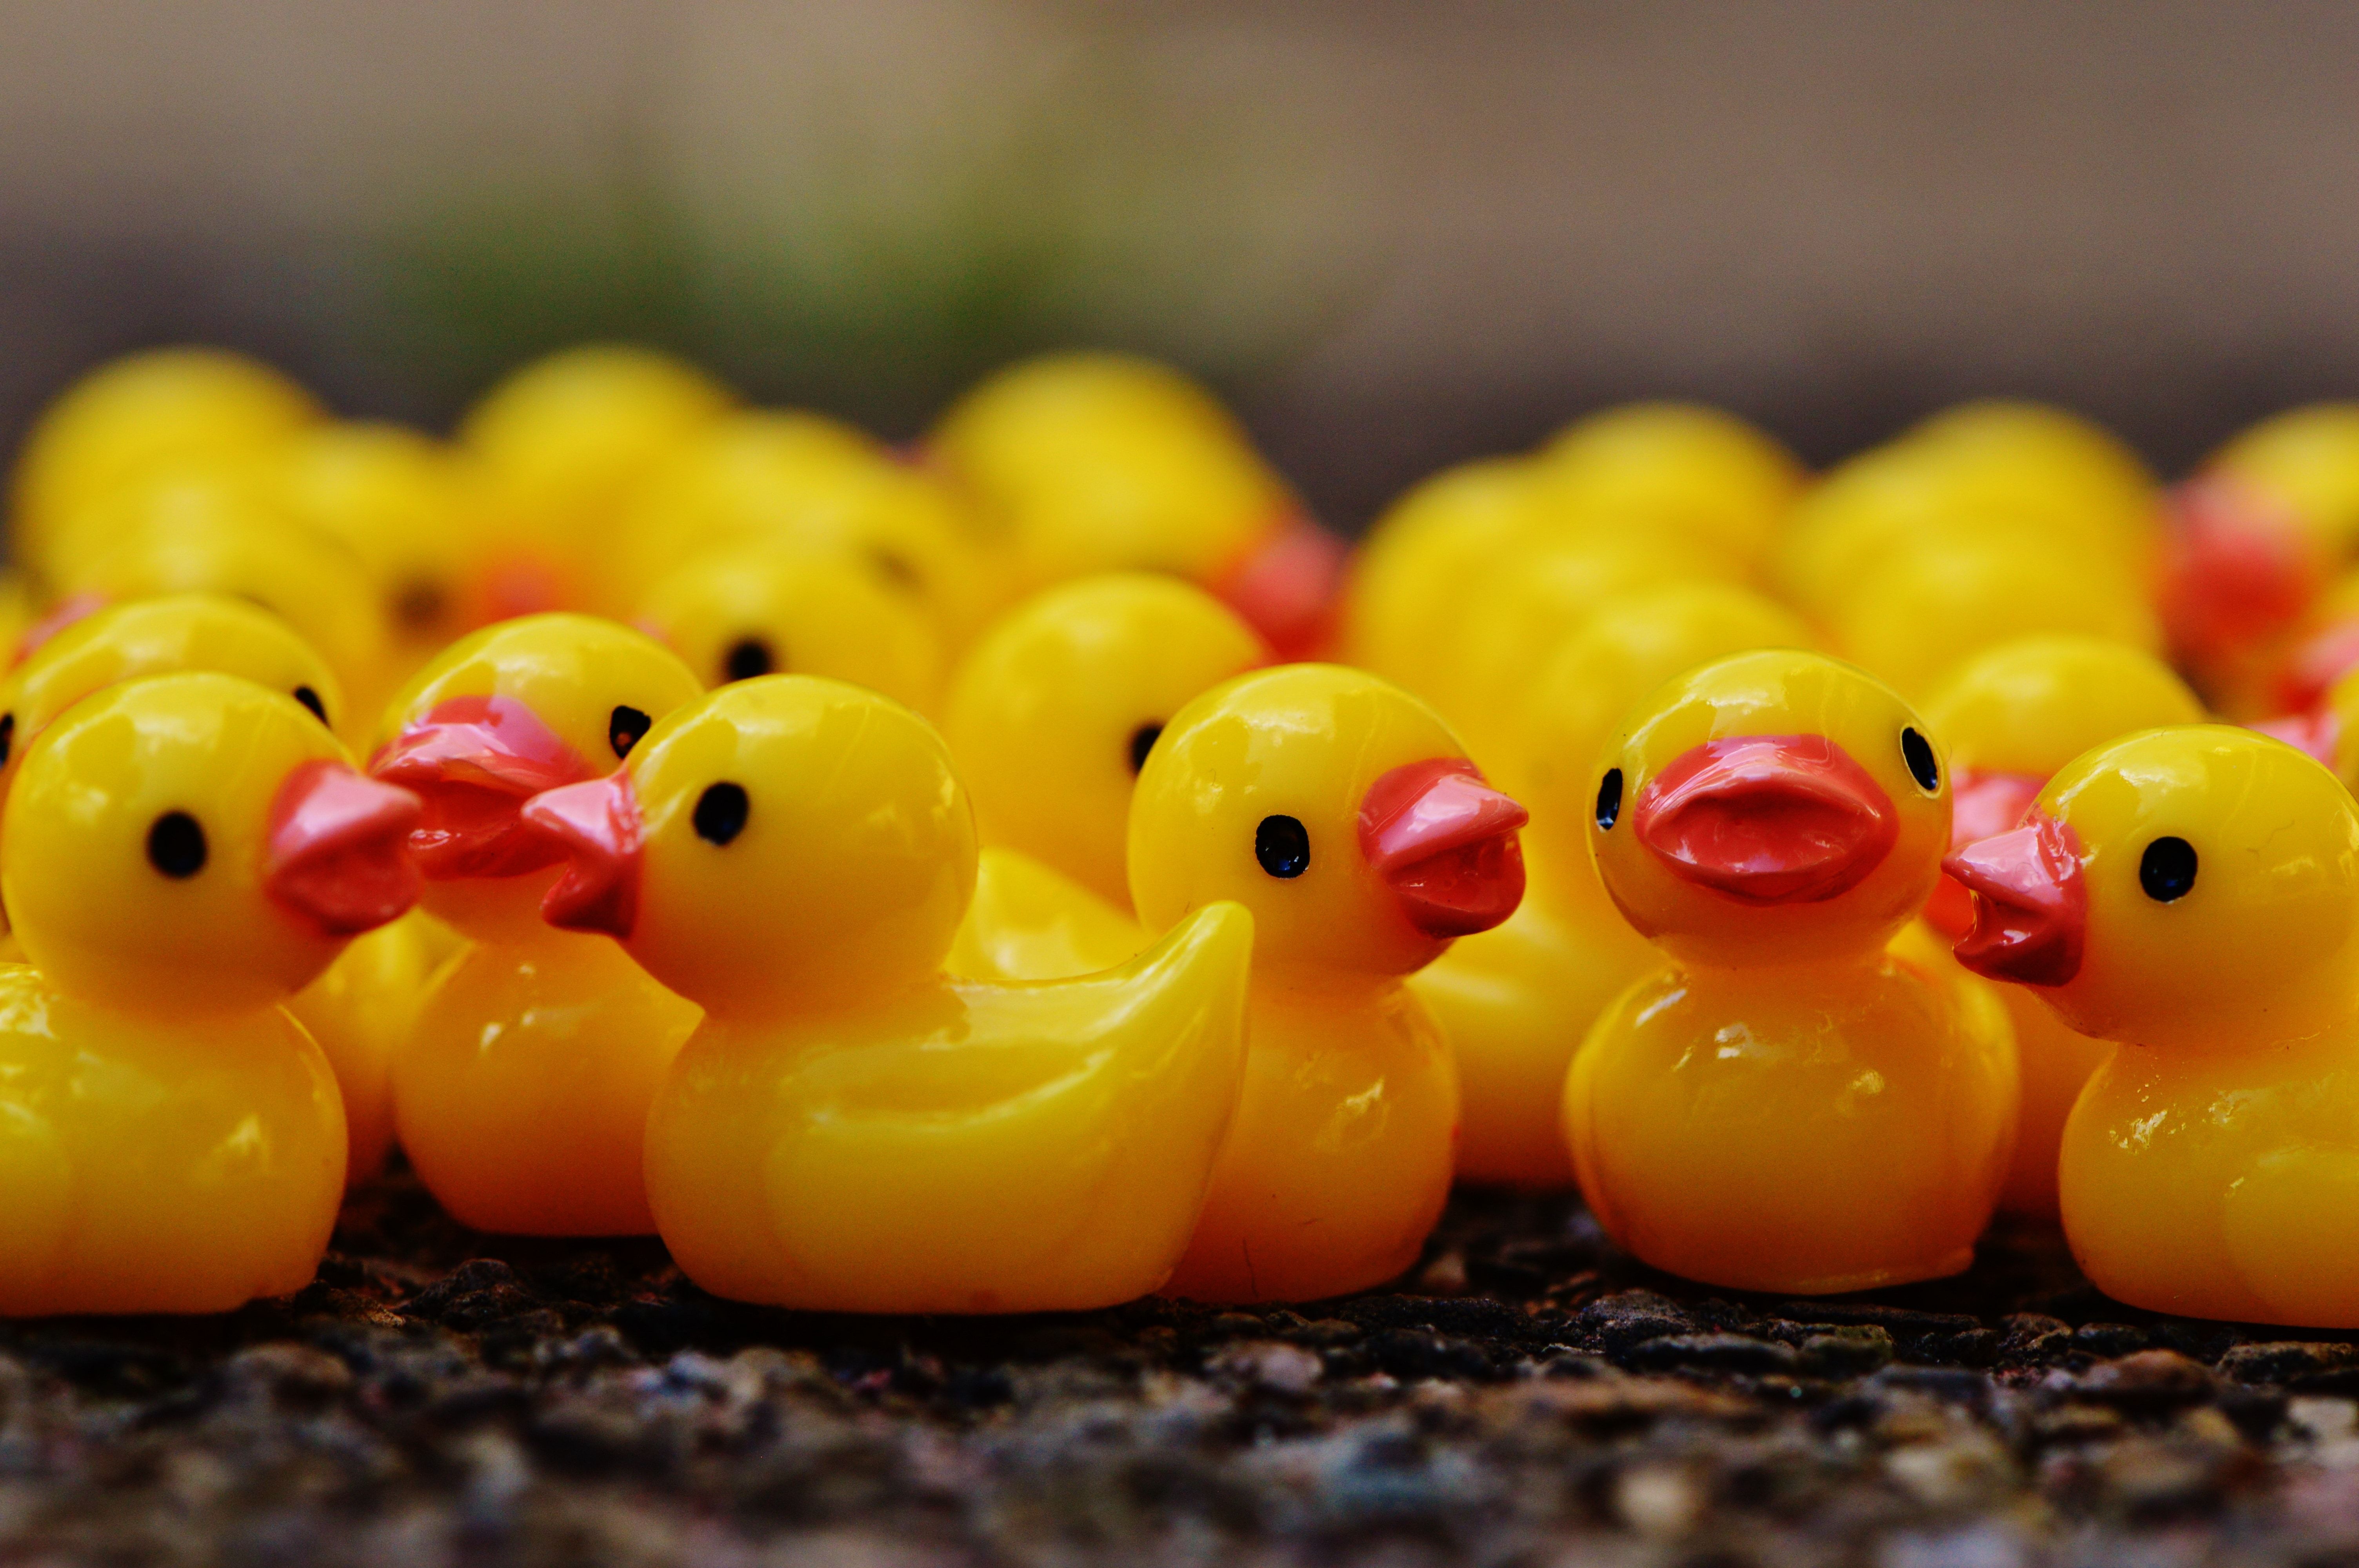 rubber duck lot free image